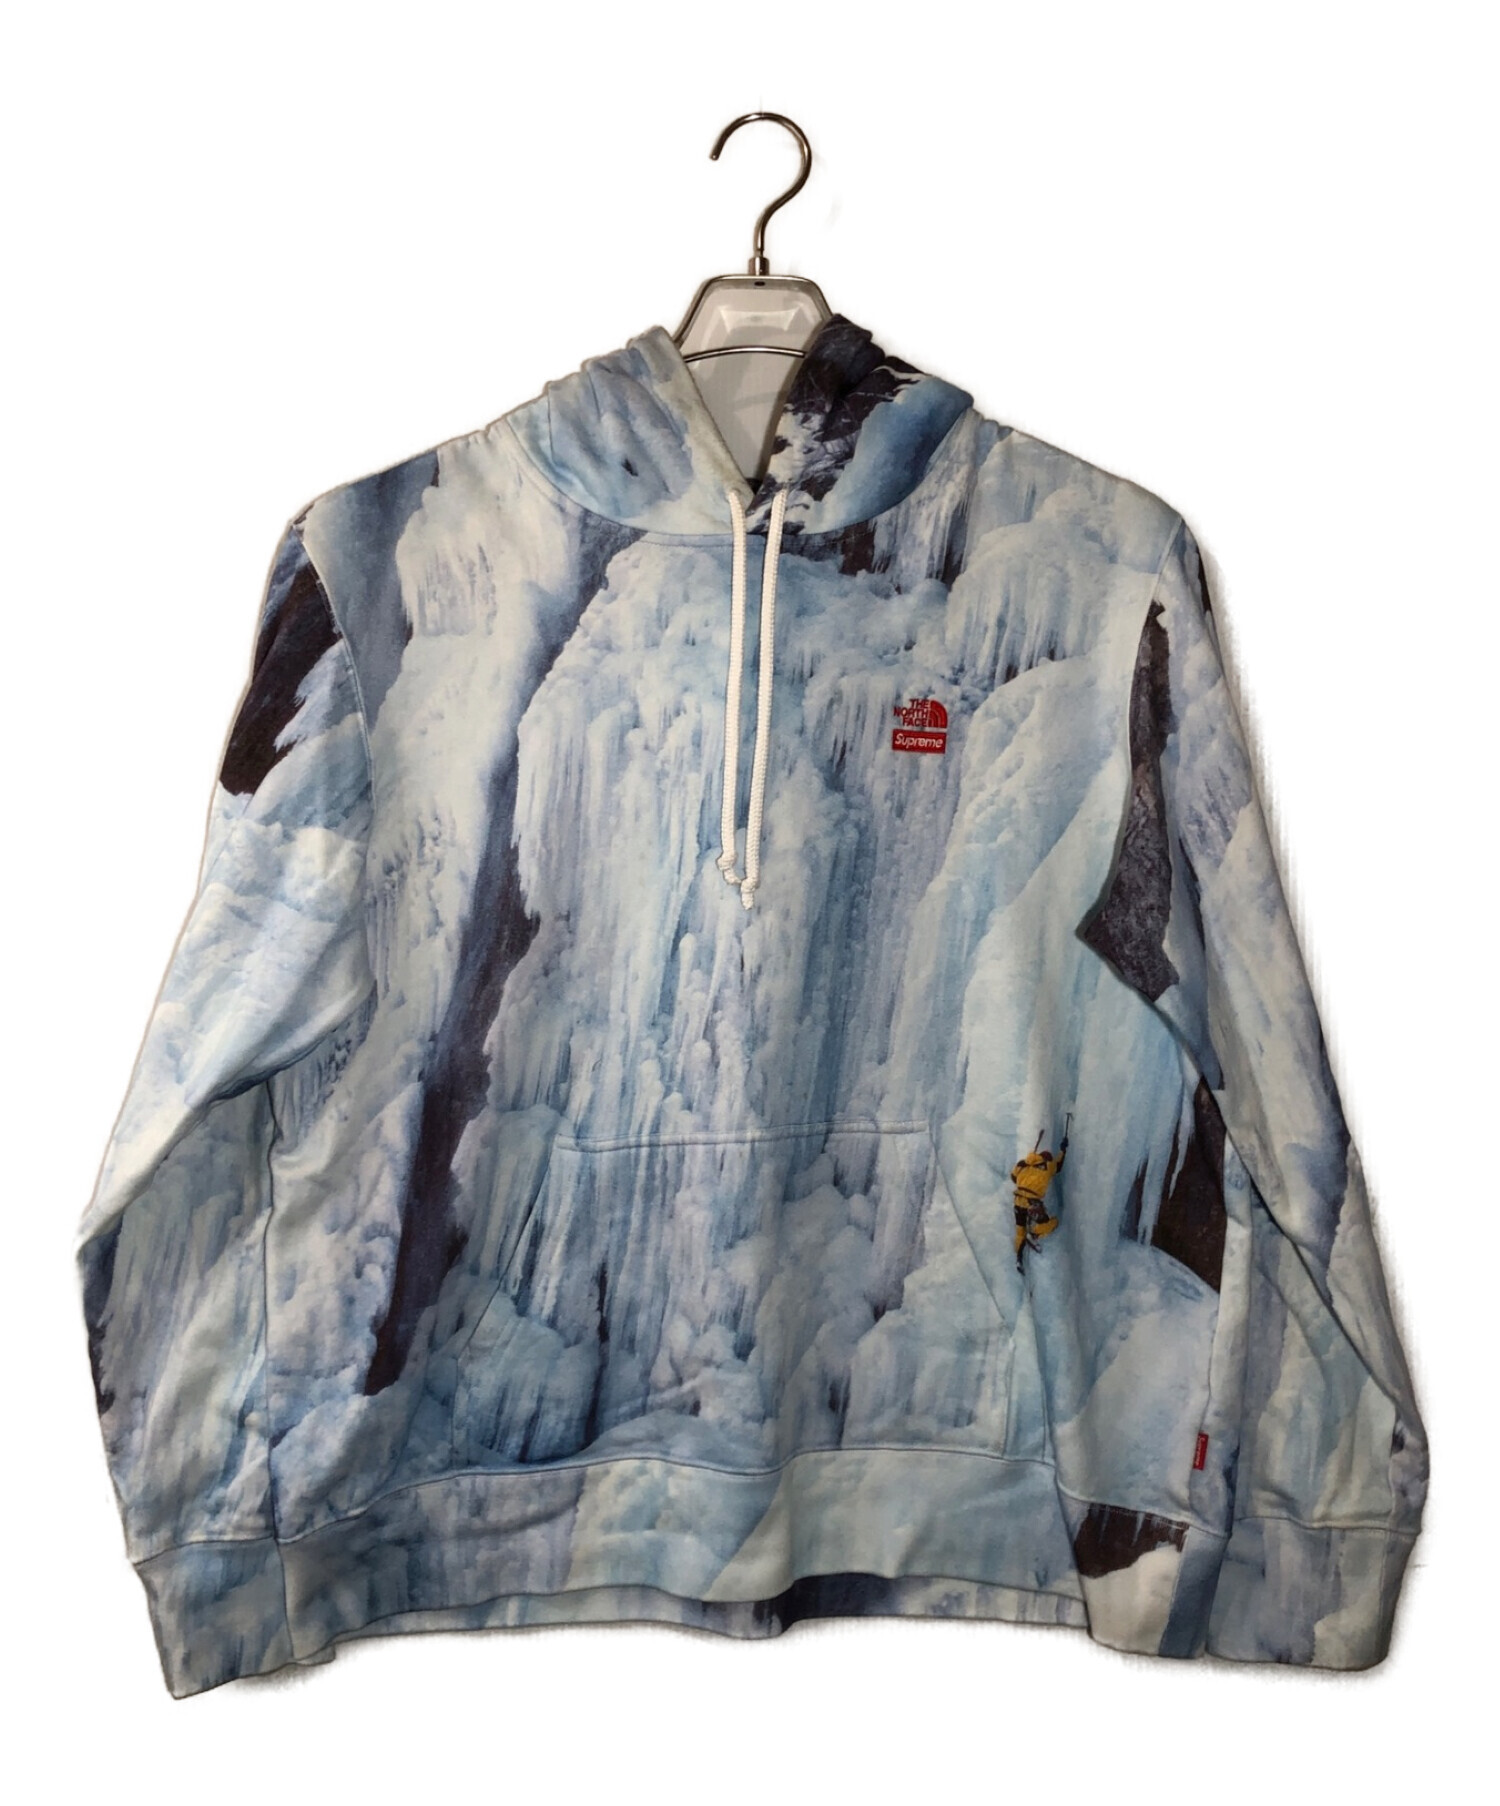 L Supreme The North Face Hooded パーカー